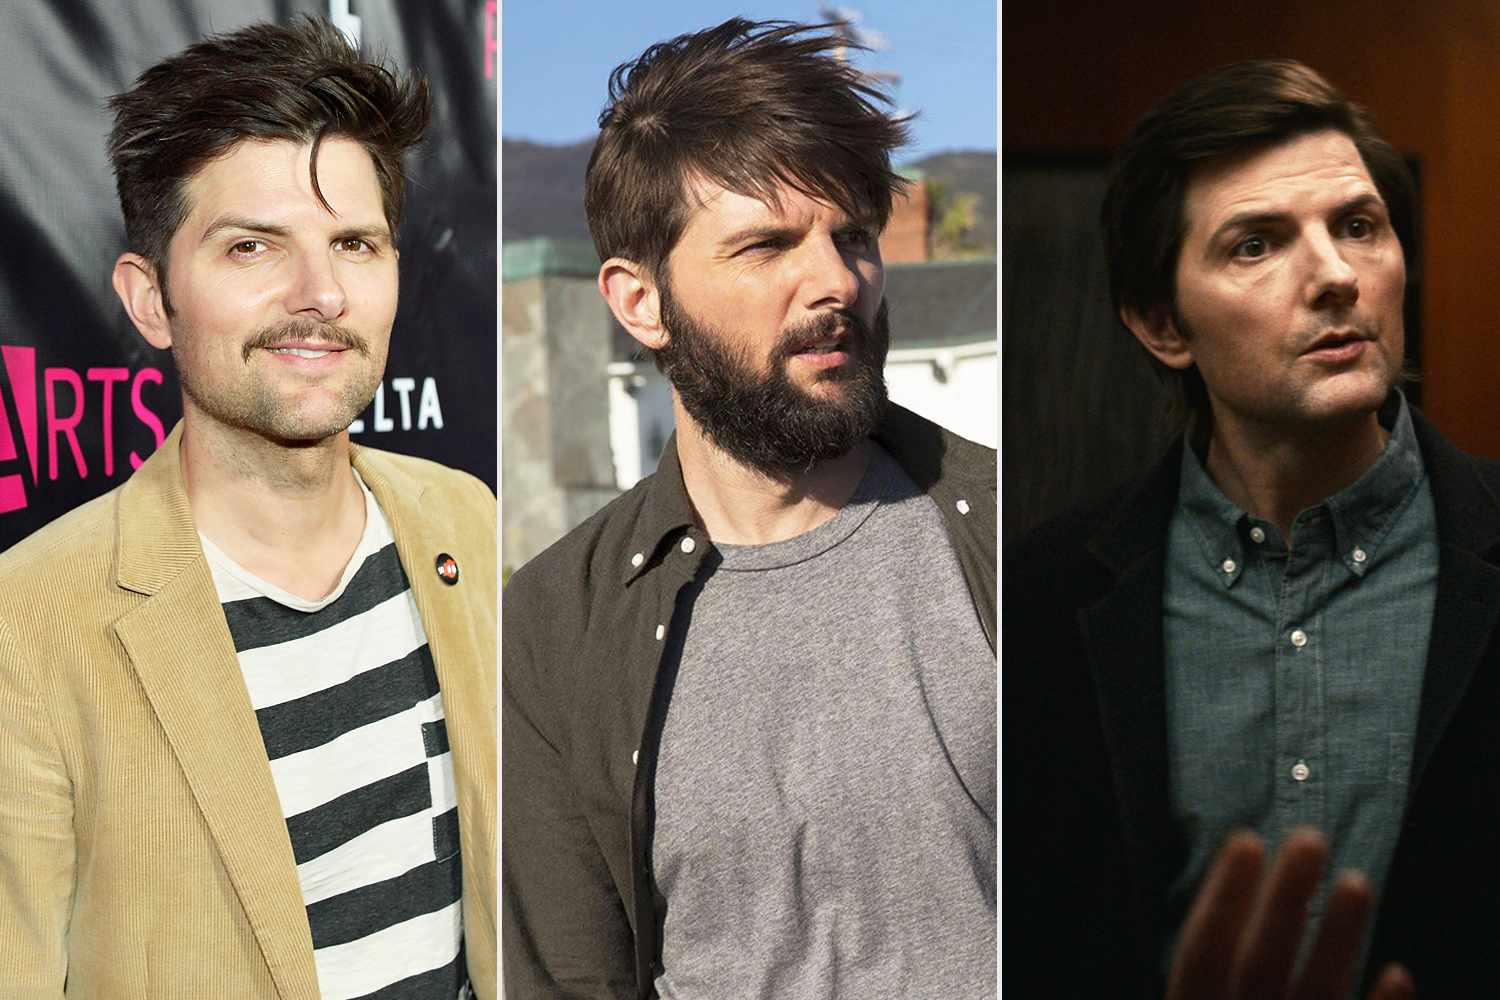 Adam Scott Reveals Which Facial Hair Style His Family Hates, Even Though He Thinks It's 'Cool' (Exclusive)